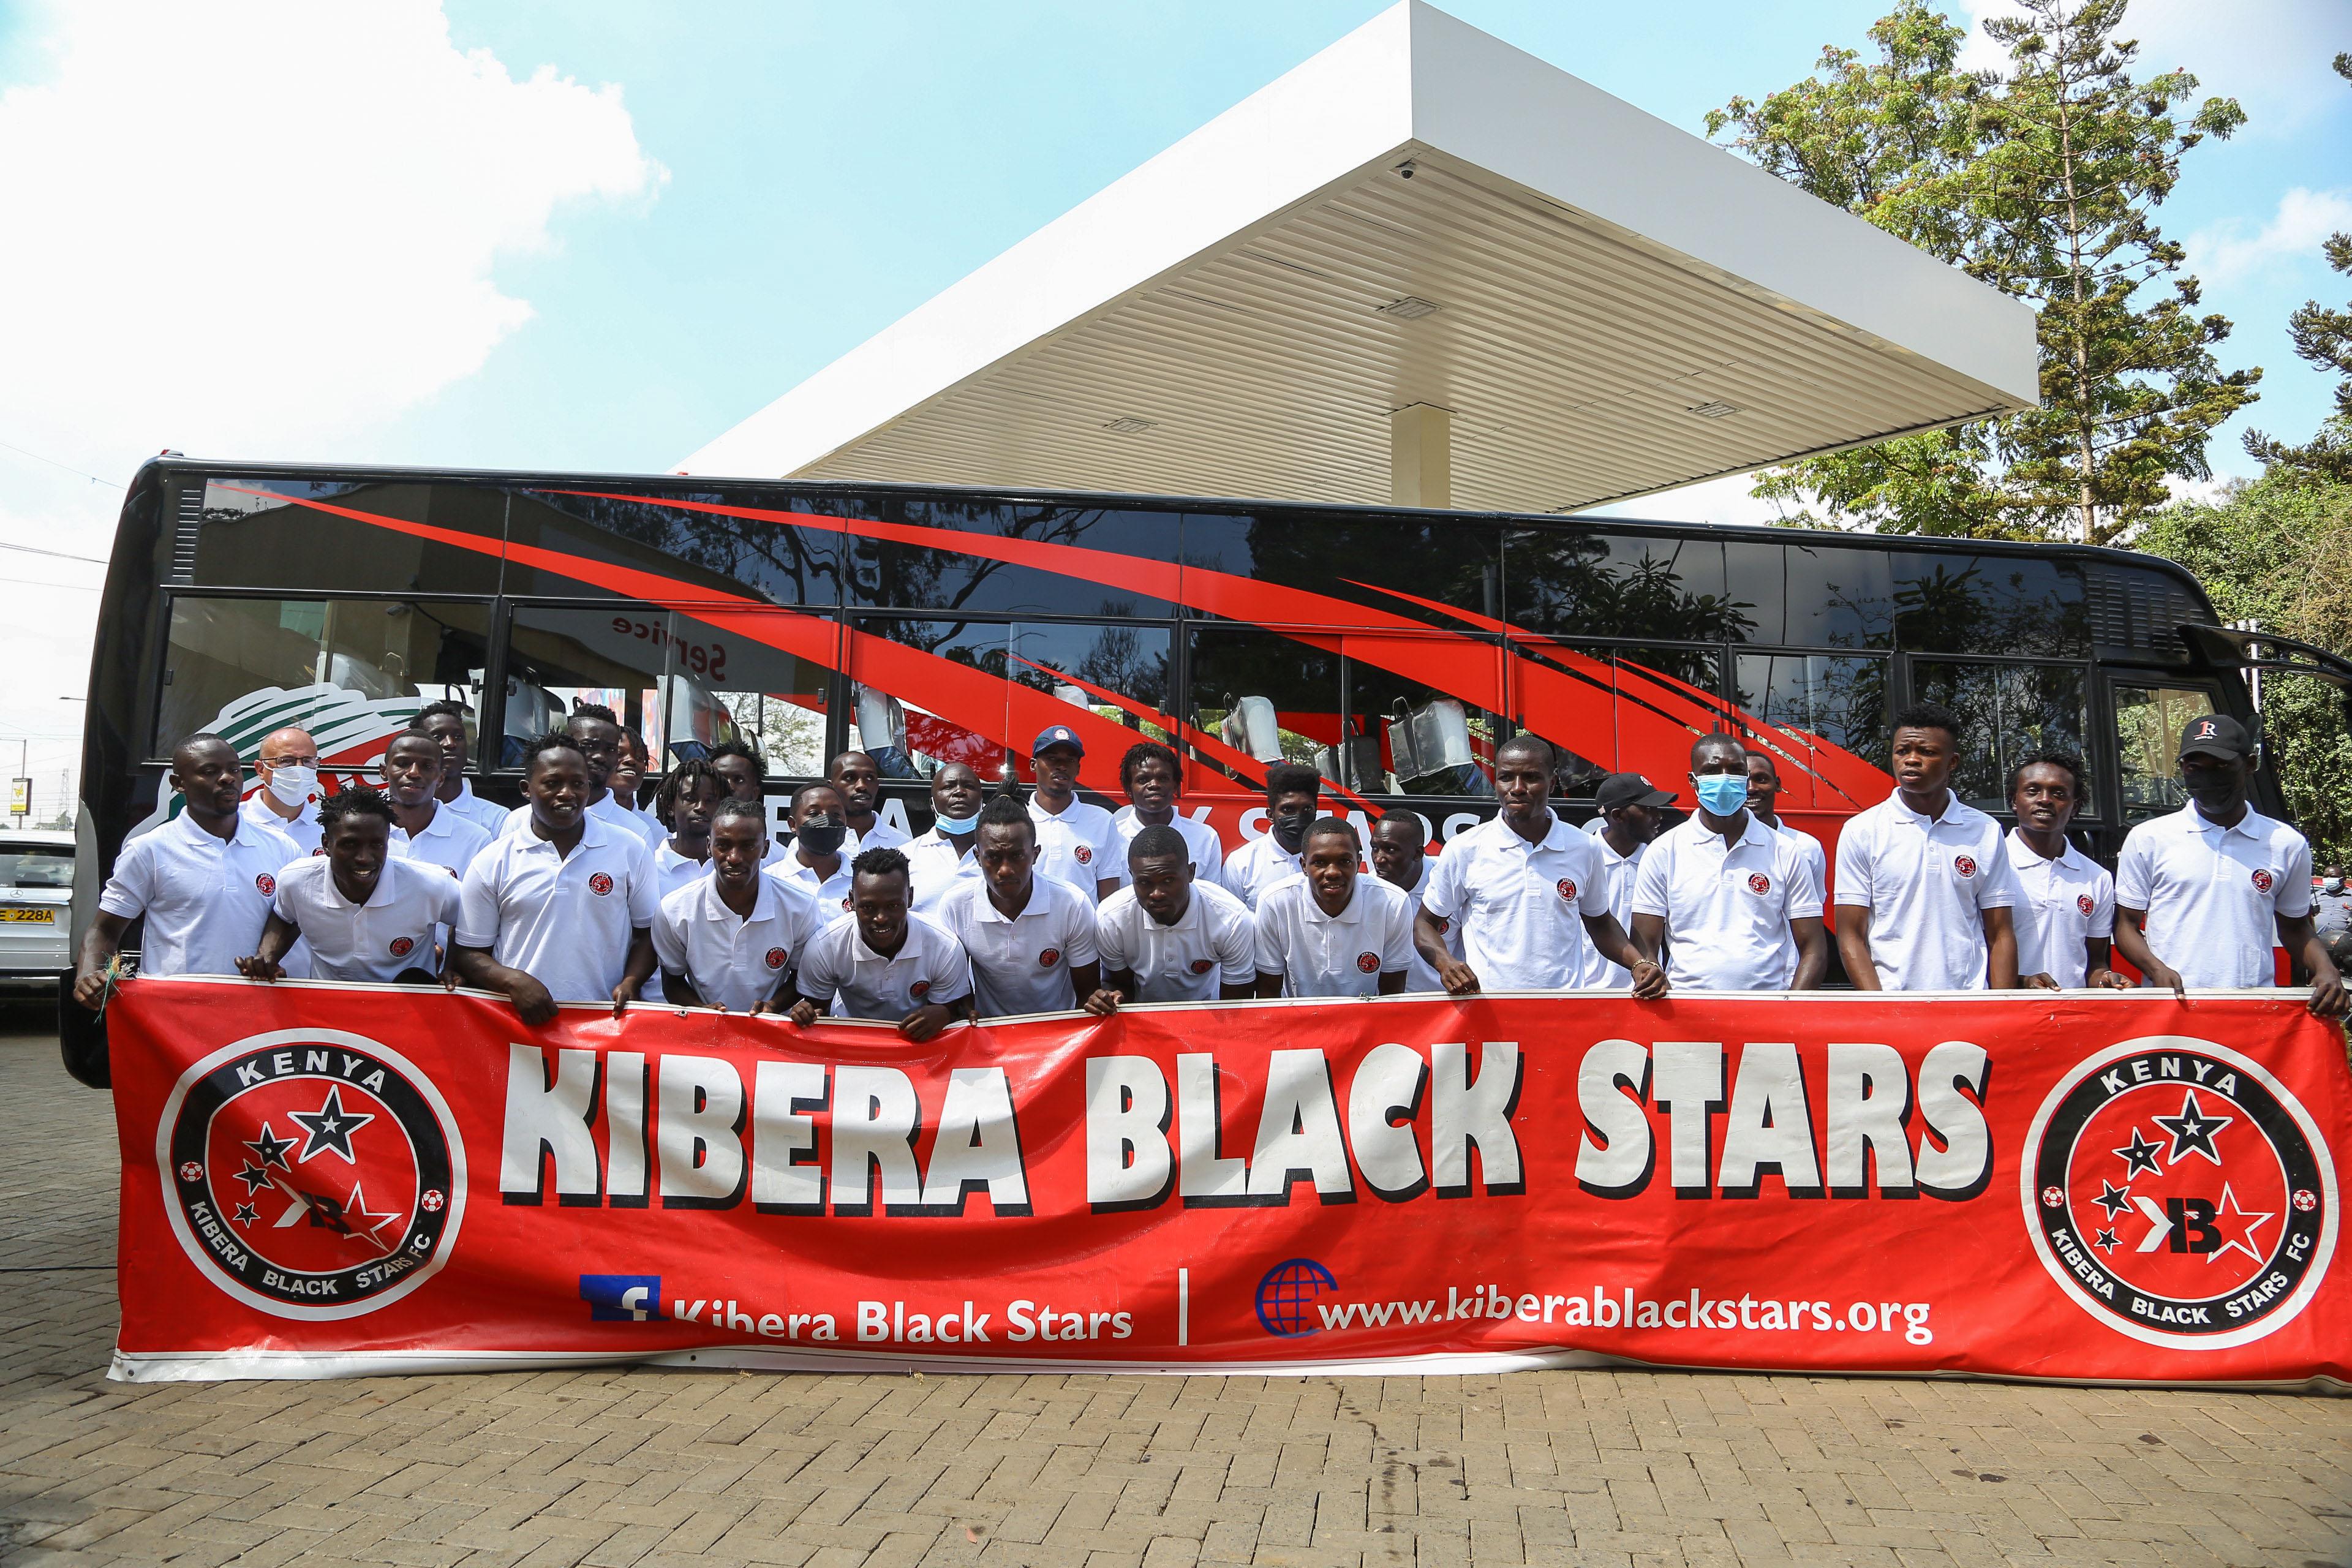 Kibera black stars association holding a banner with their name in front of a branded bus given by Rubis energy Kenya